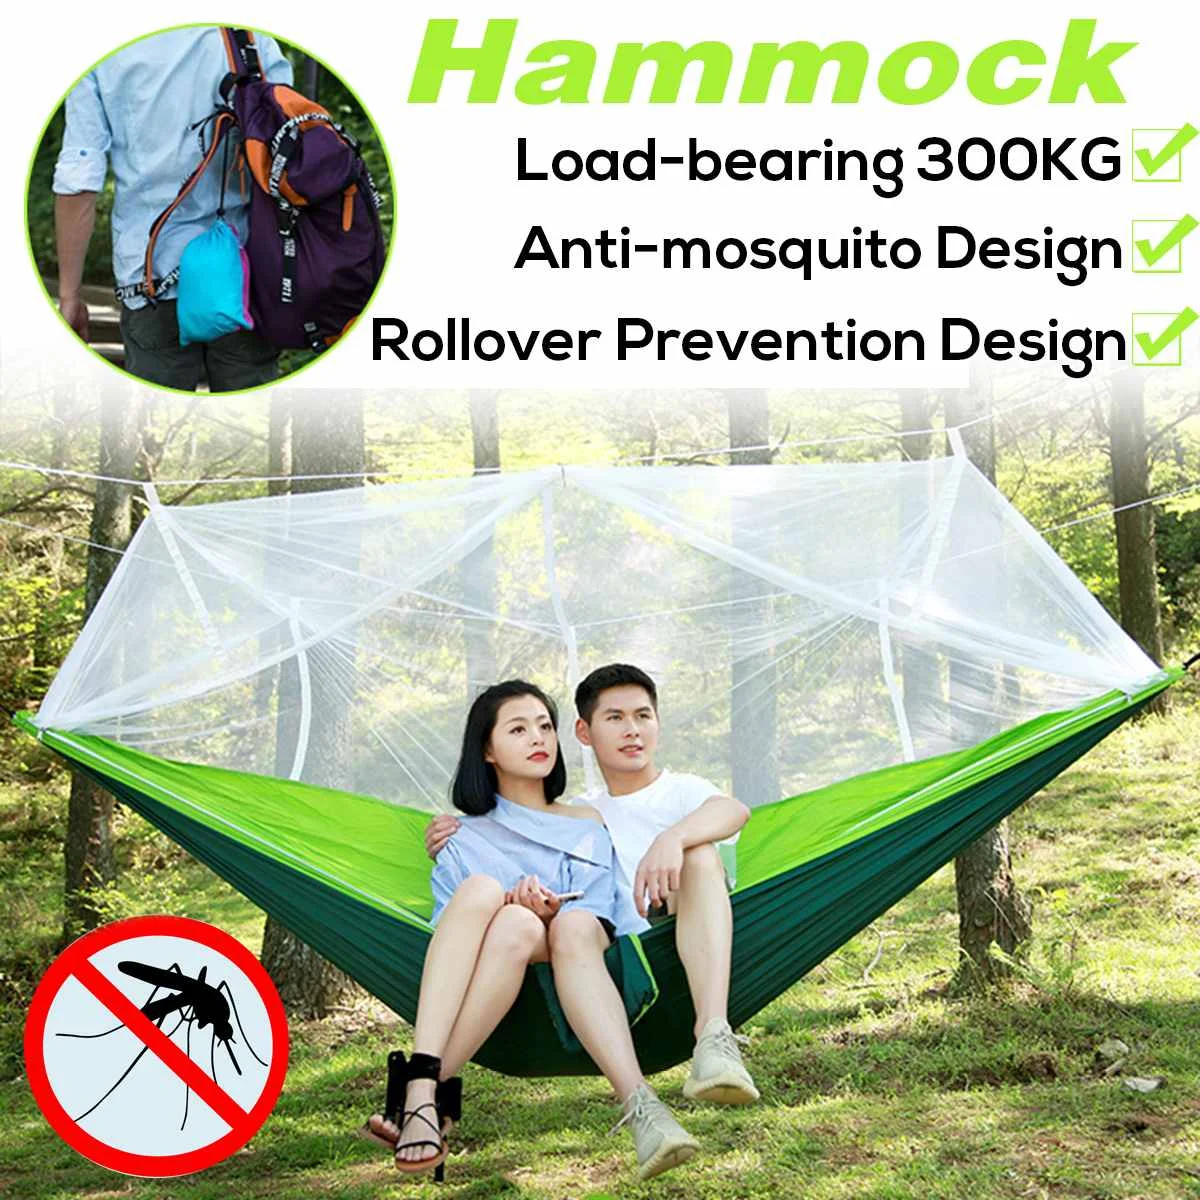 

Portable Outdoor Travel Camping Hammock Mosquito Net Set Parachute Fabric Backpacking Hanging Bed Sleeping Swing Capacity 300KG